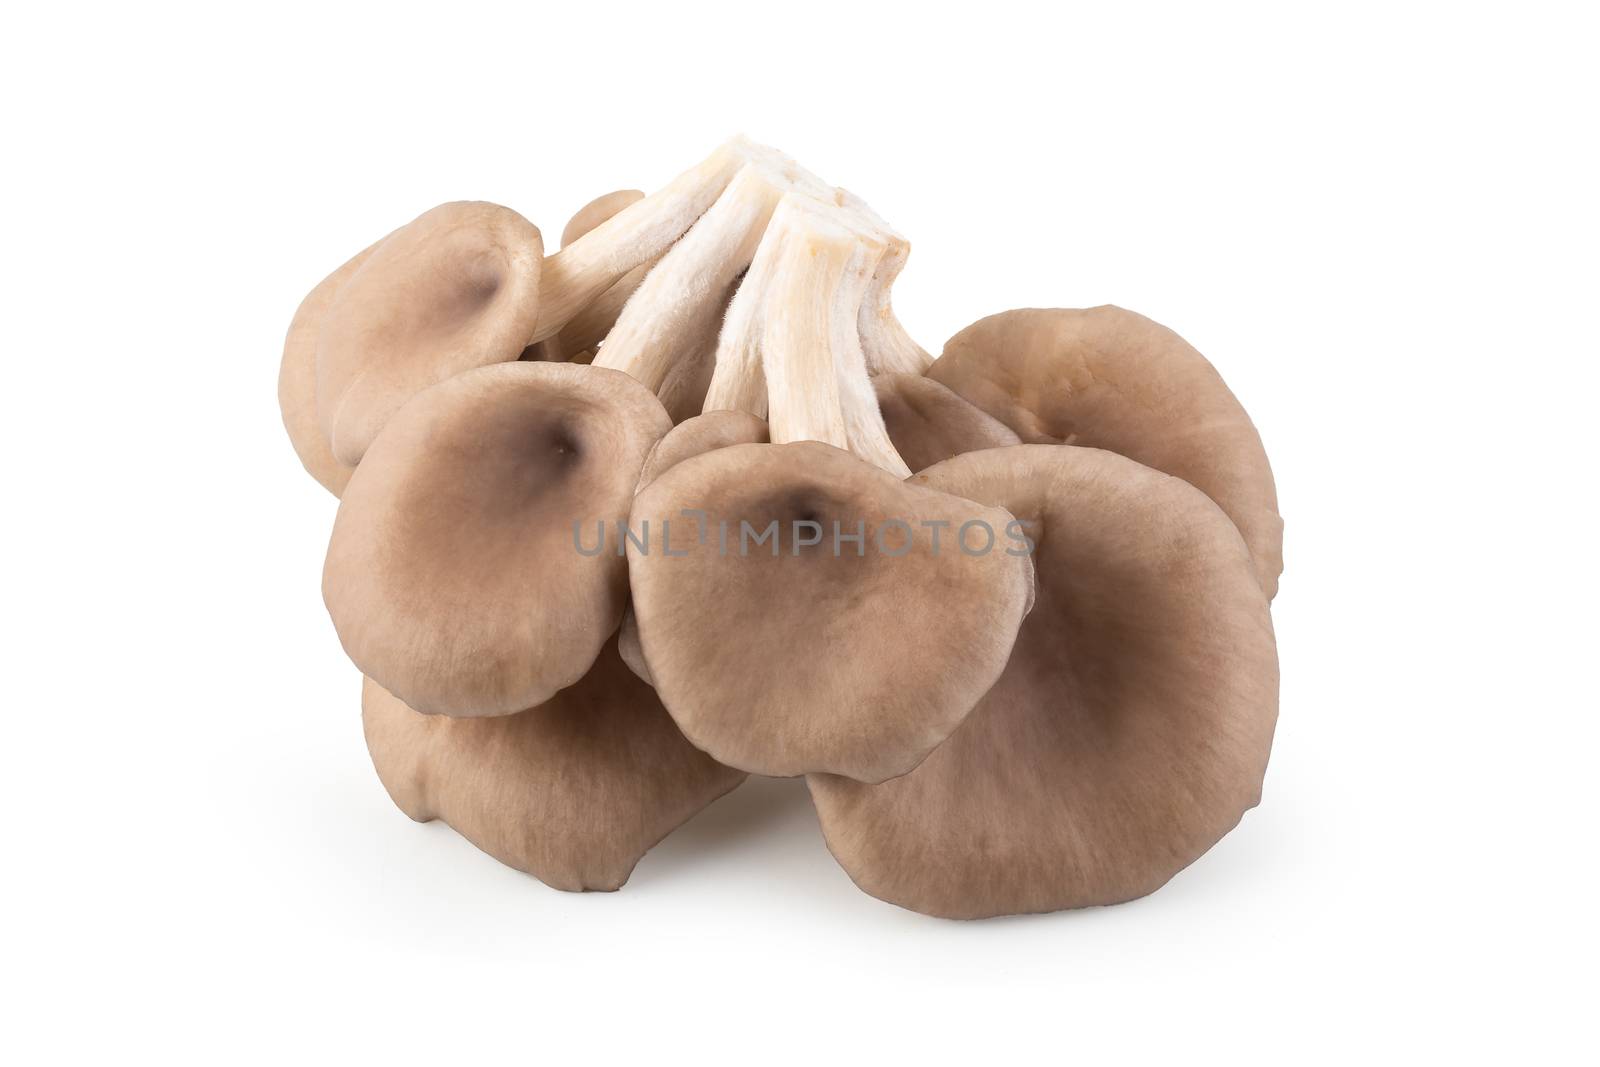 Oyster mushrooms isolated on a white background